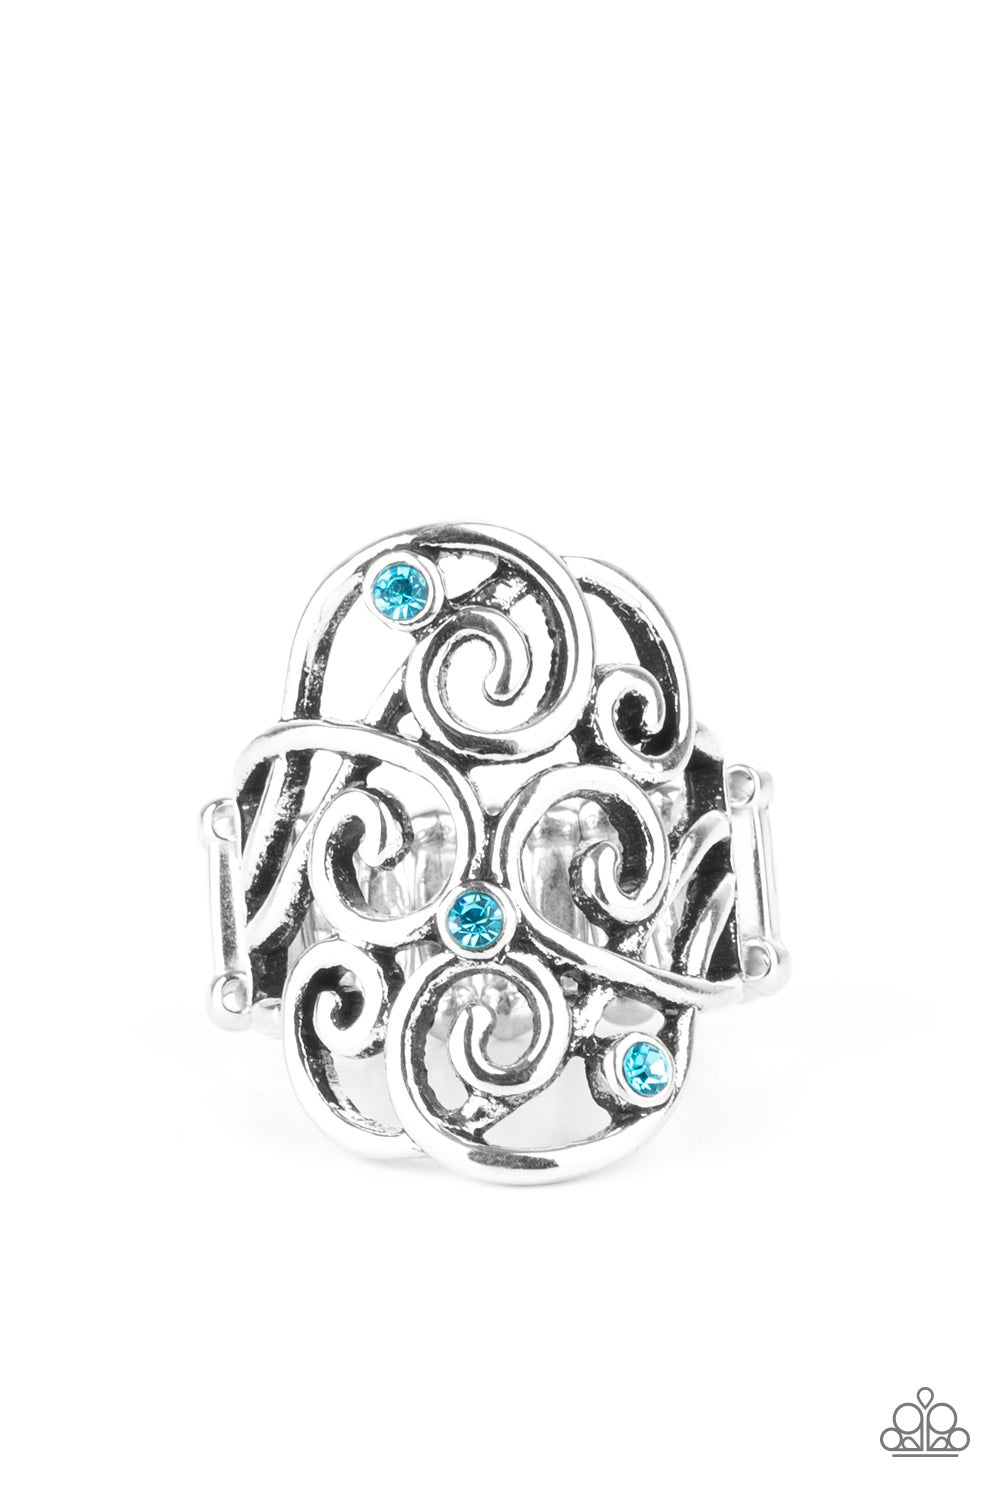 Paparazzi - FRILL Out! - Blue Ring - Alies Bling Bar